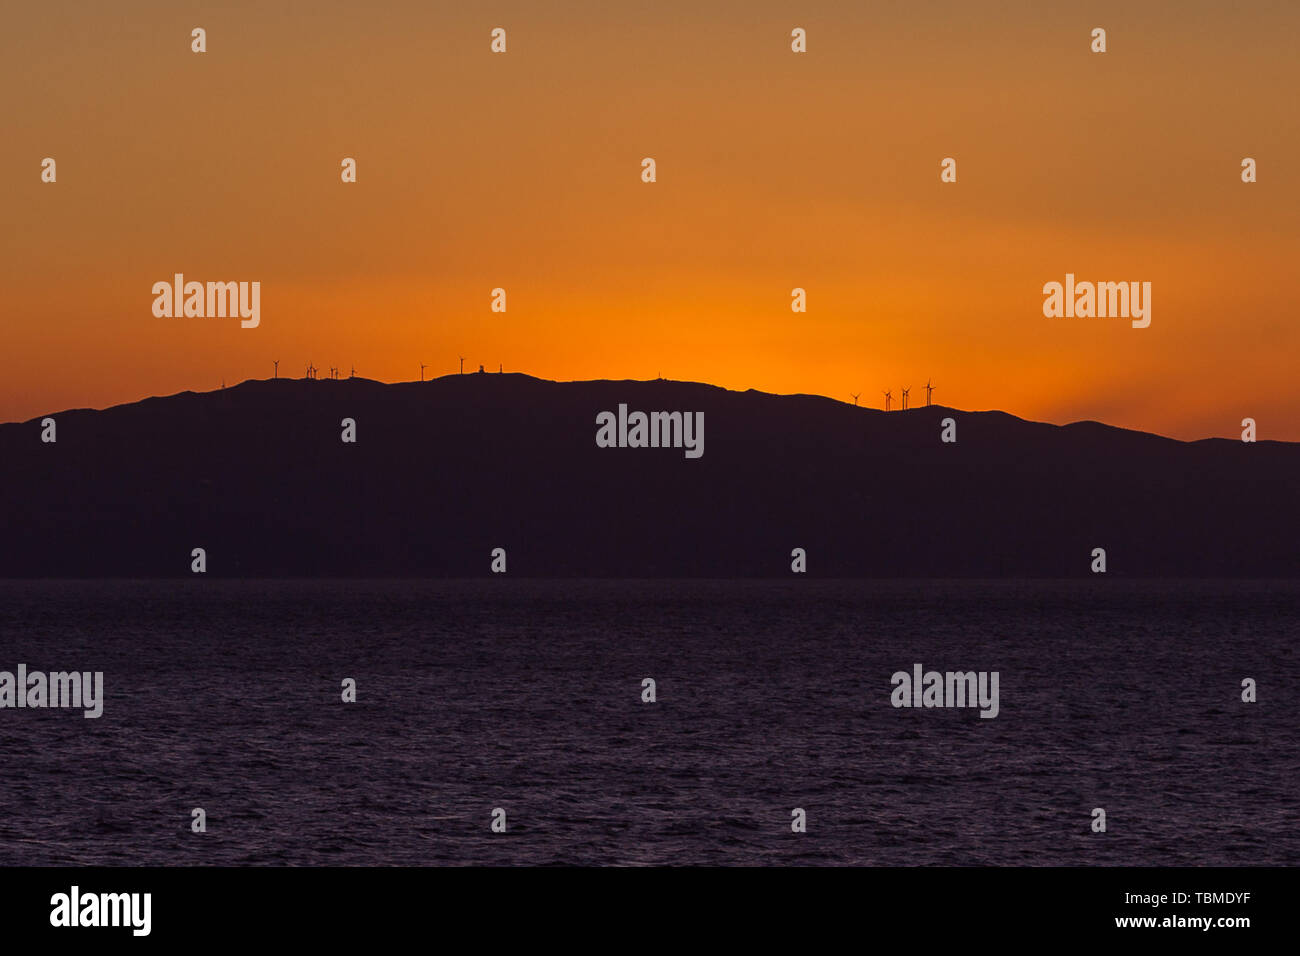 Wonderful orange sky behind the profile of an island carpeted with wind turbines Stock Photo